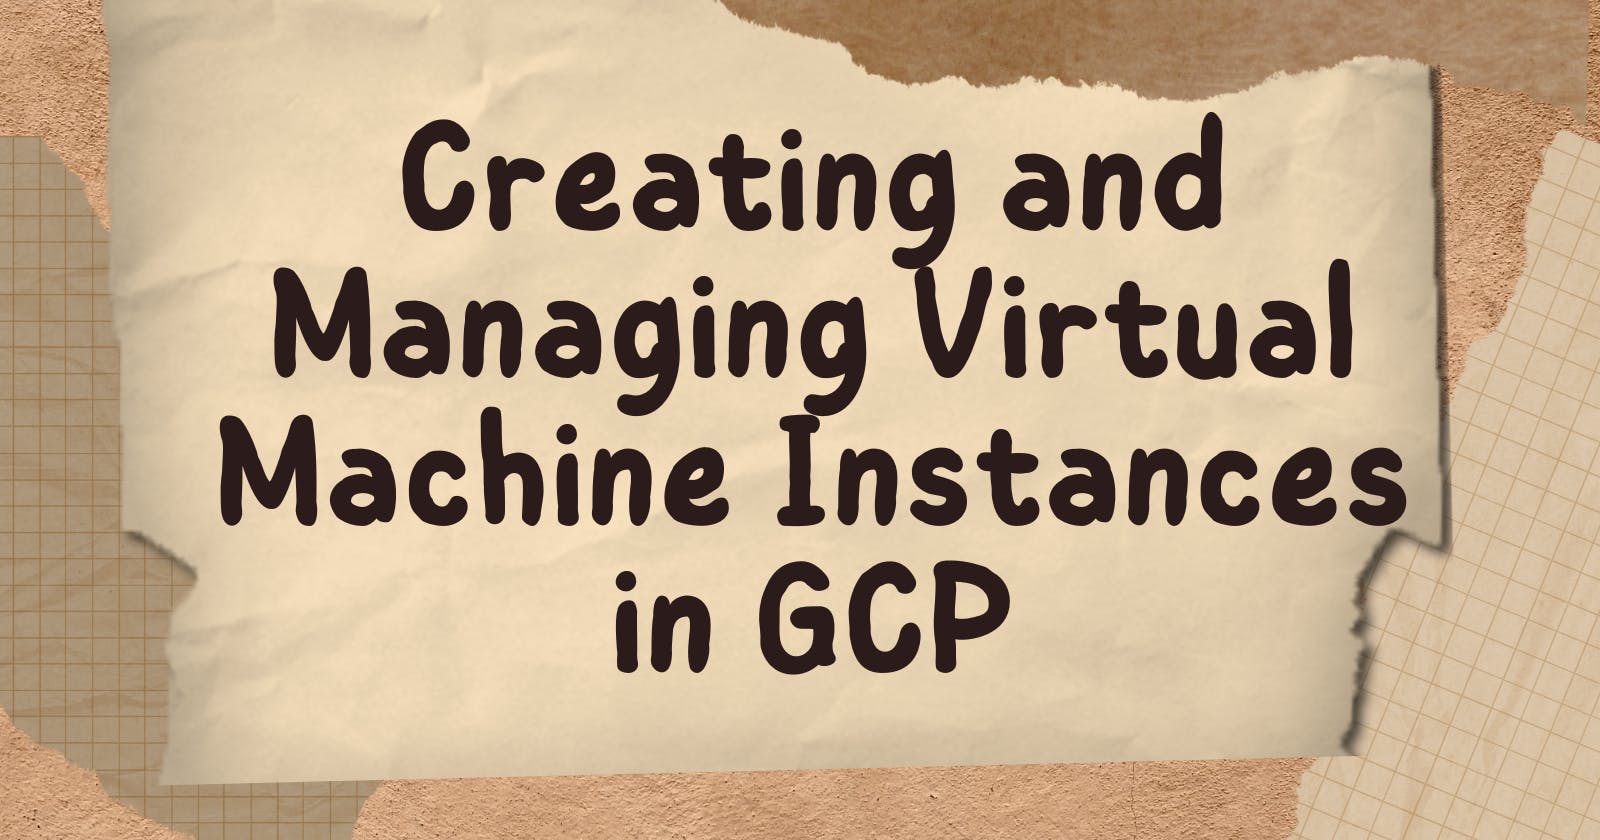 Creating and Managing Virtual Machine Instances in GCP